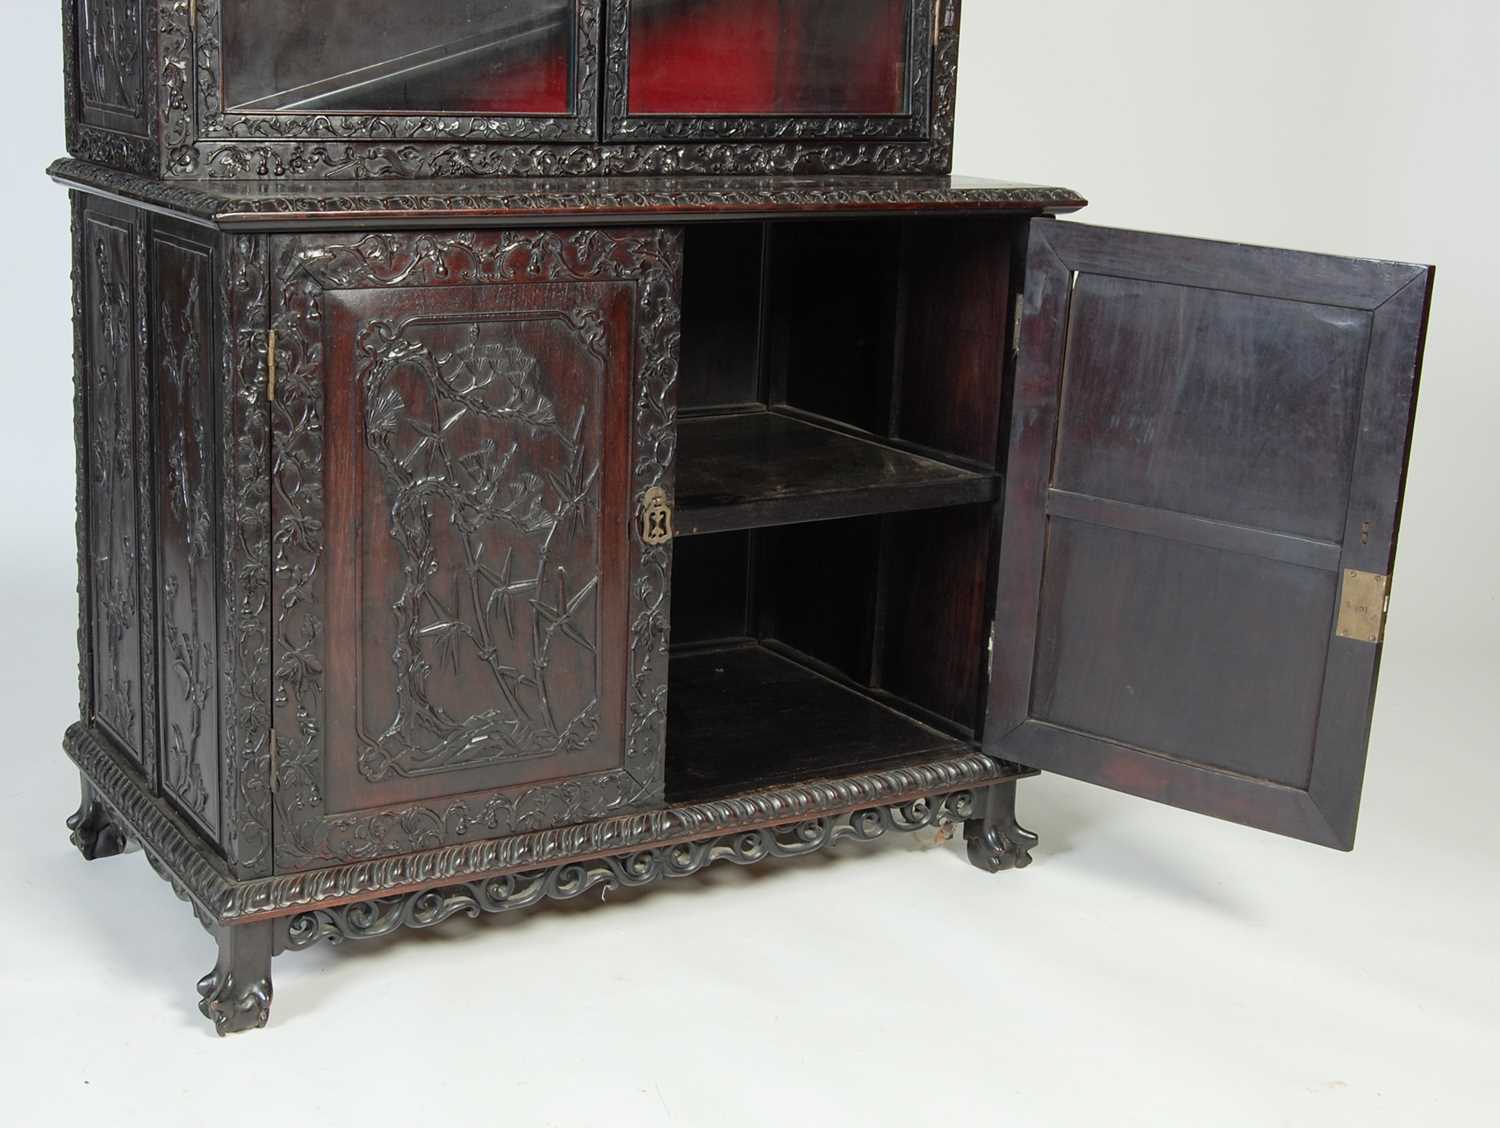 A Chinese dark wood display cabinet/ bookcase, late 19th/ early 20th century, the upper section with - Image 7 of 8